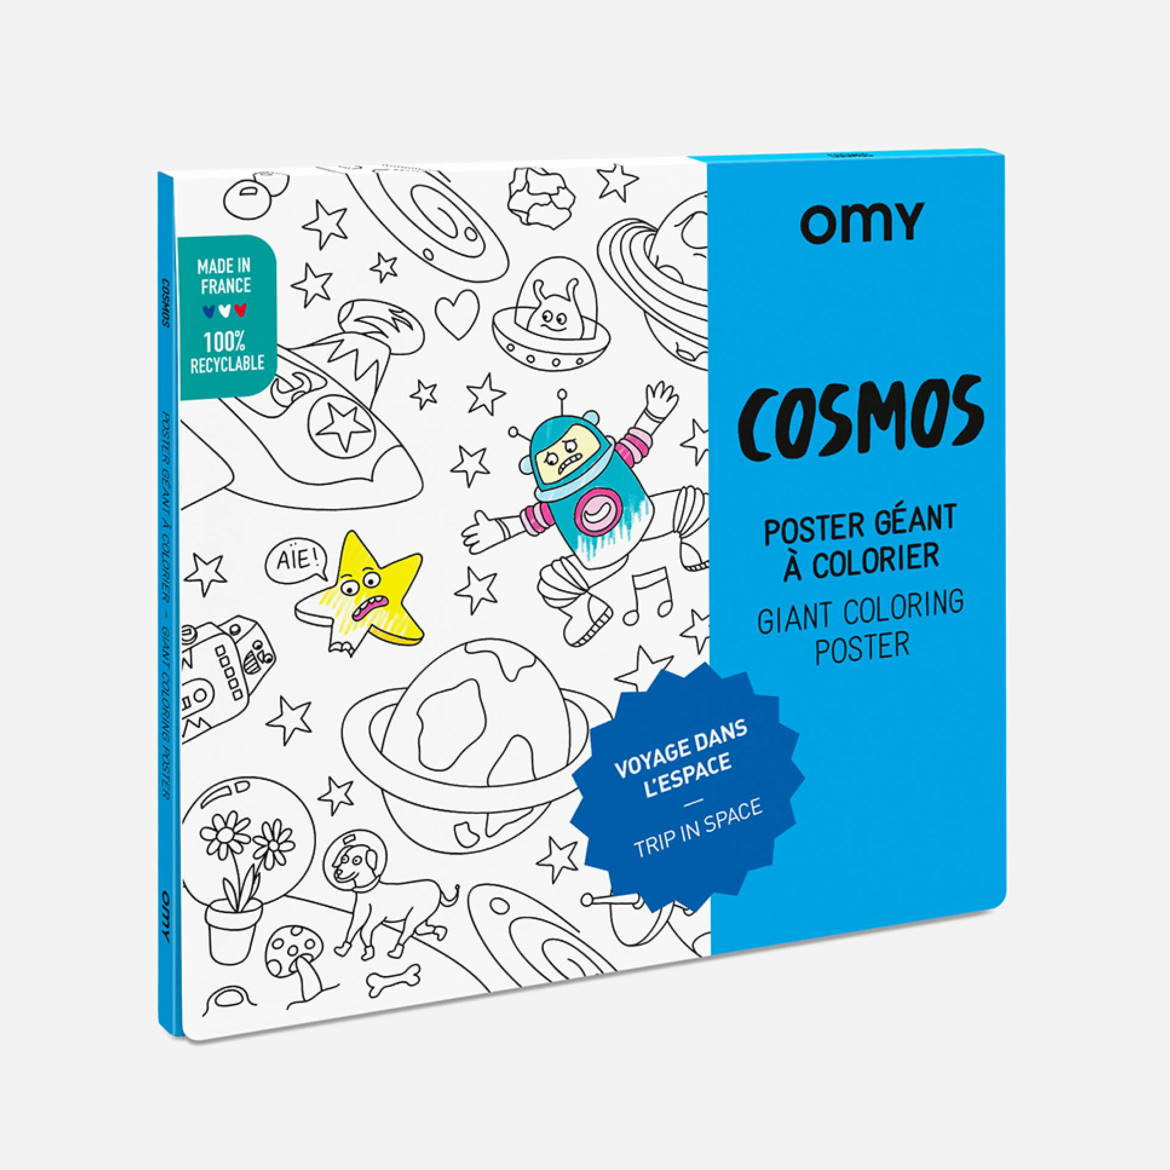 Giant Colouring Poster - Cosmos - OMY